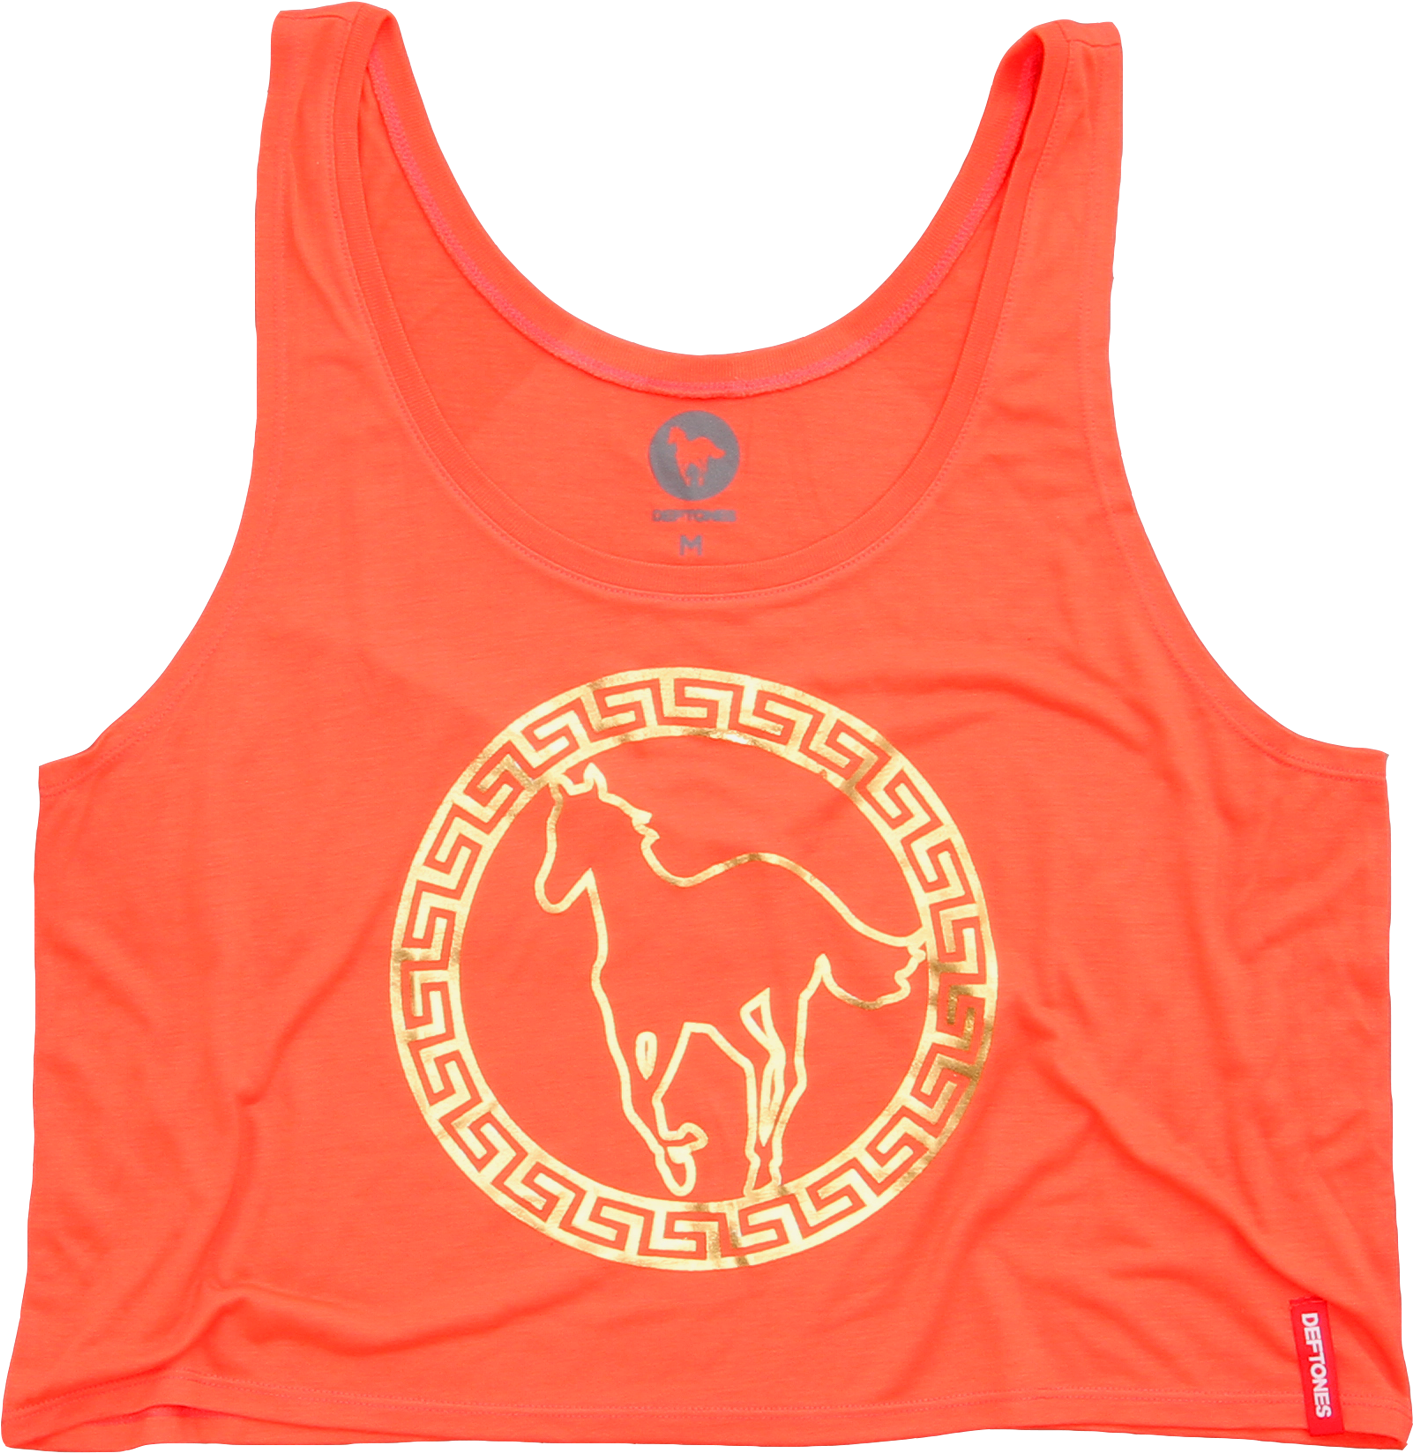 A Orange Tank Top With A Horse On It